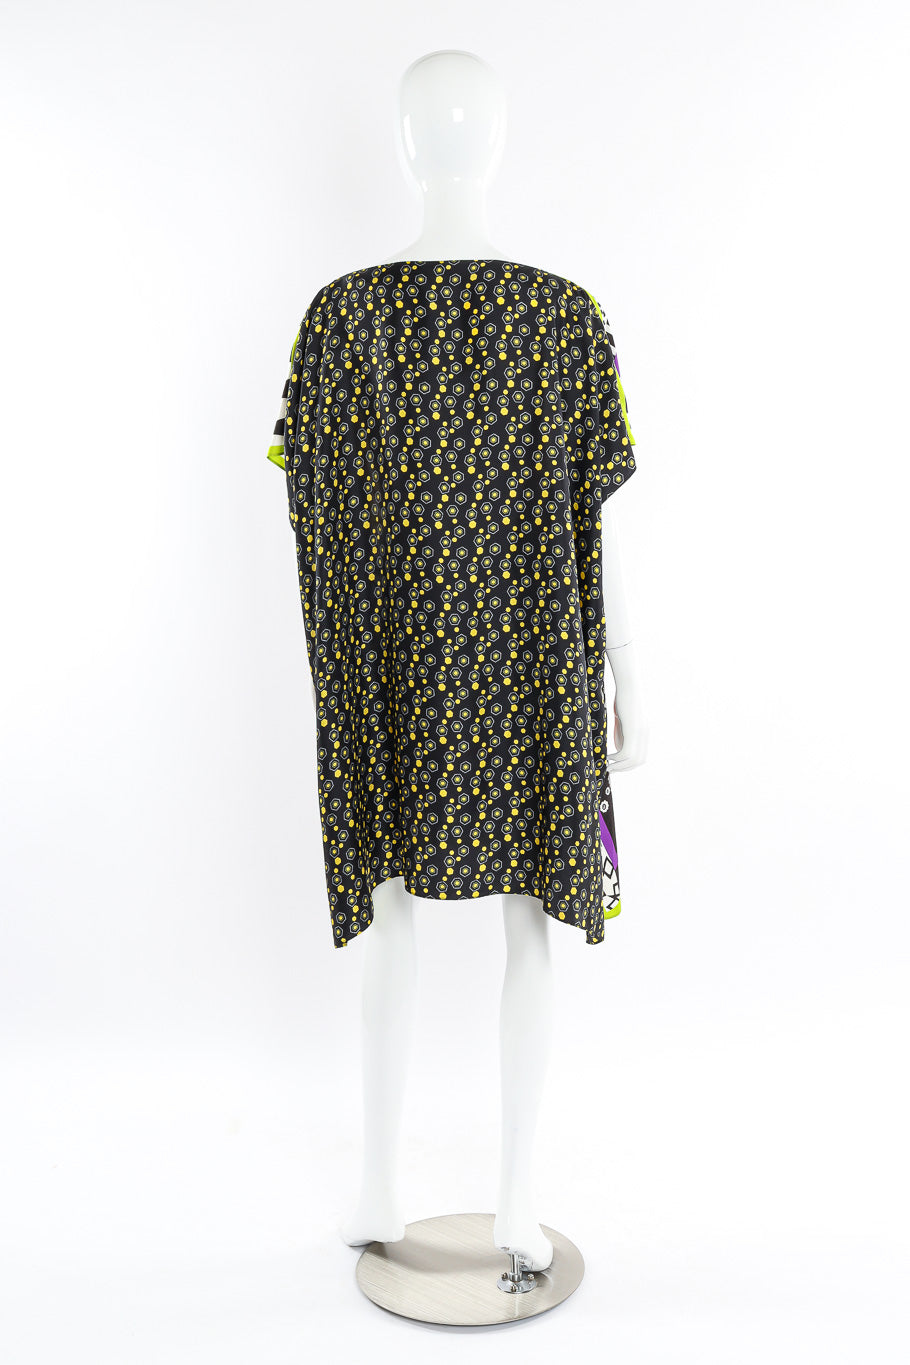 Poncho scarf top by Etro mannequin full back @recessla